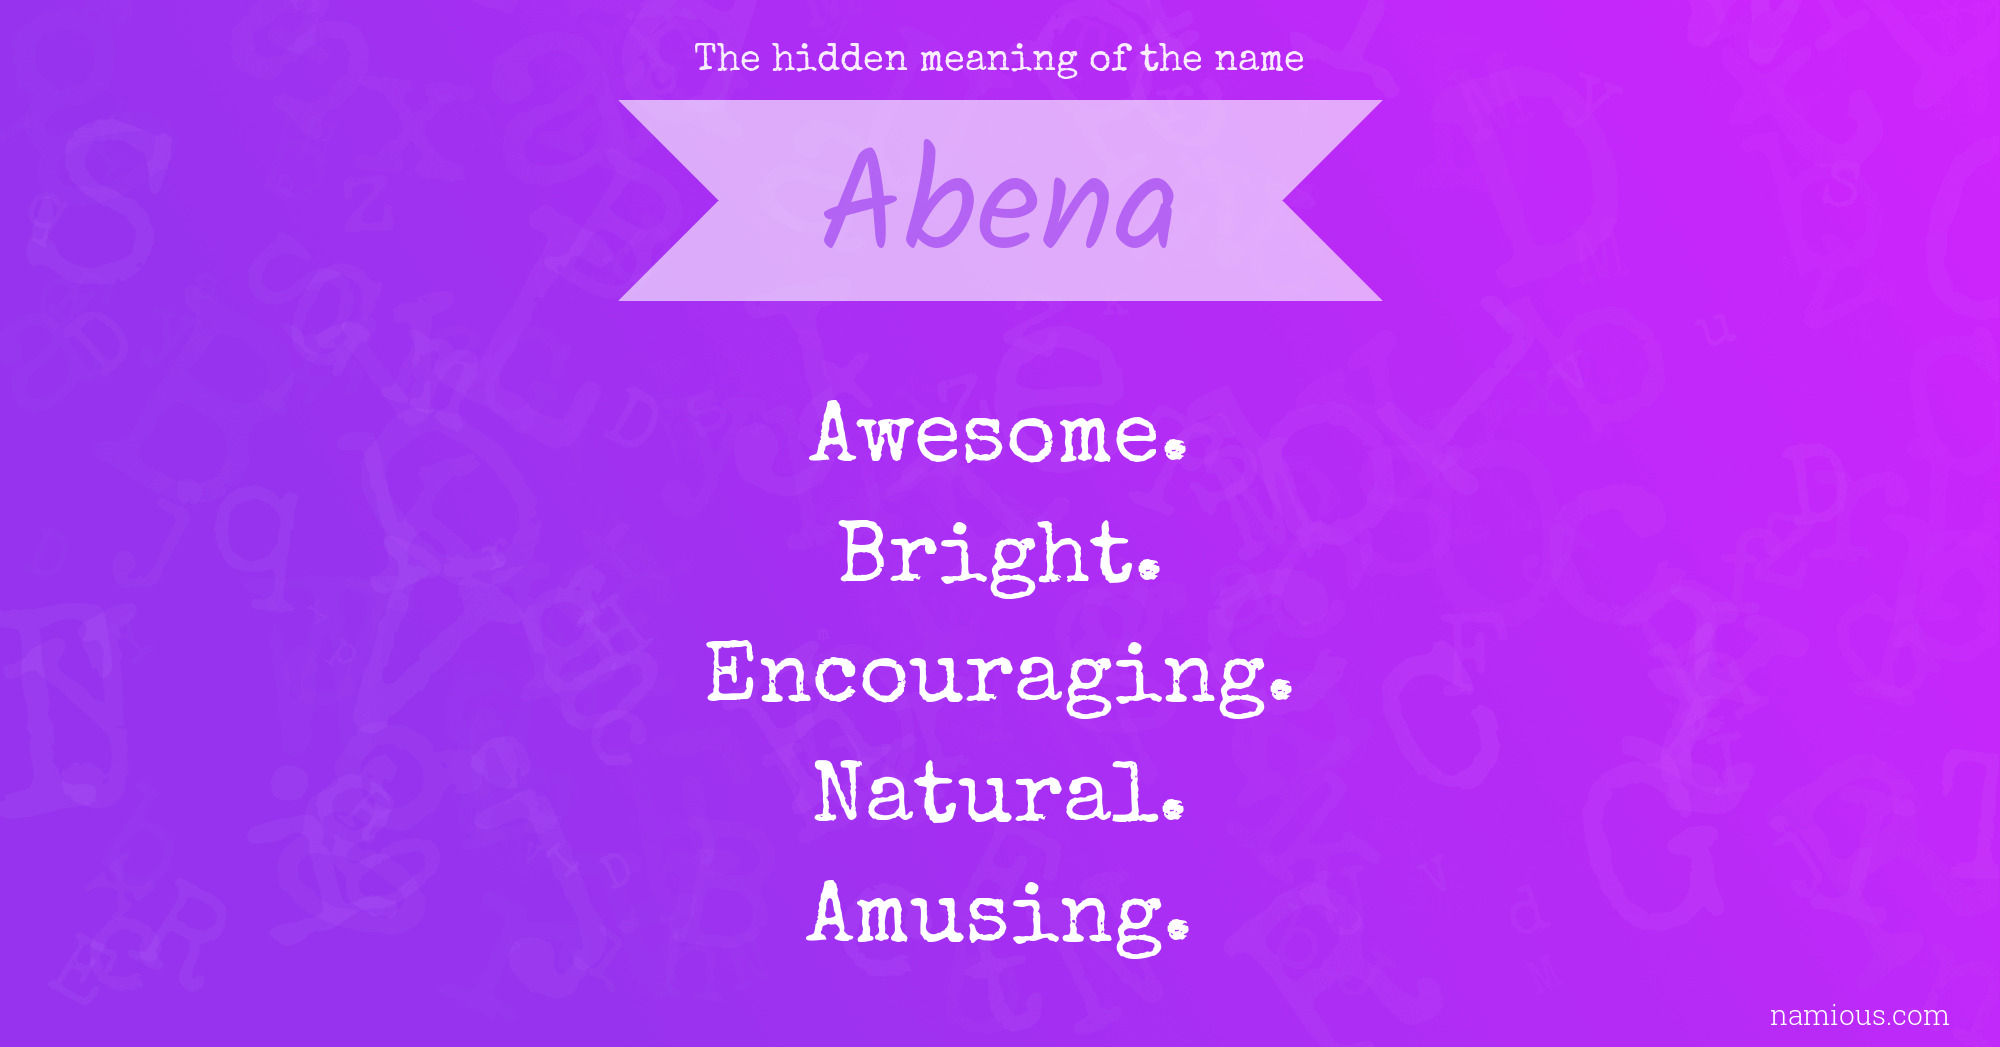 The hidden meaning of the name Abena